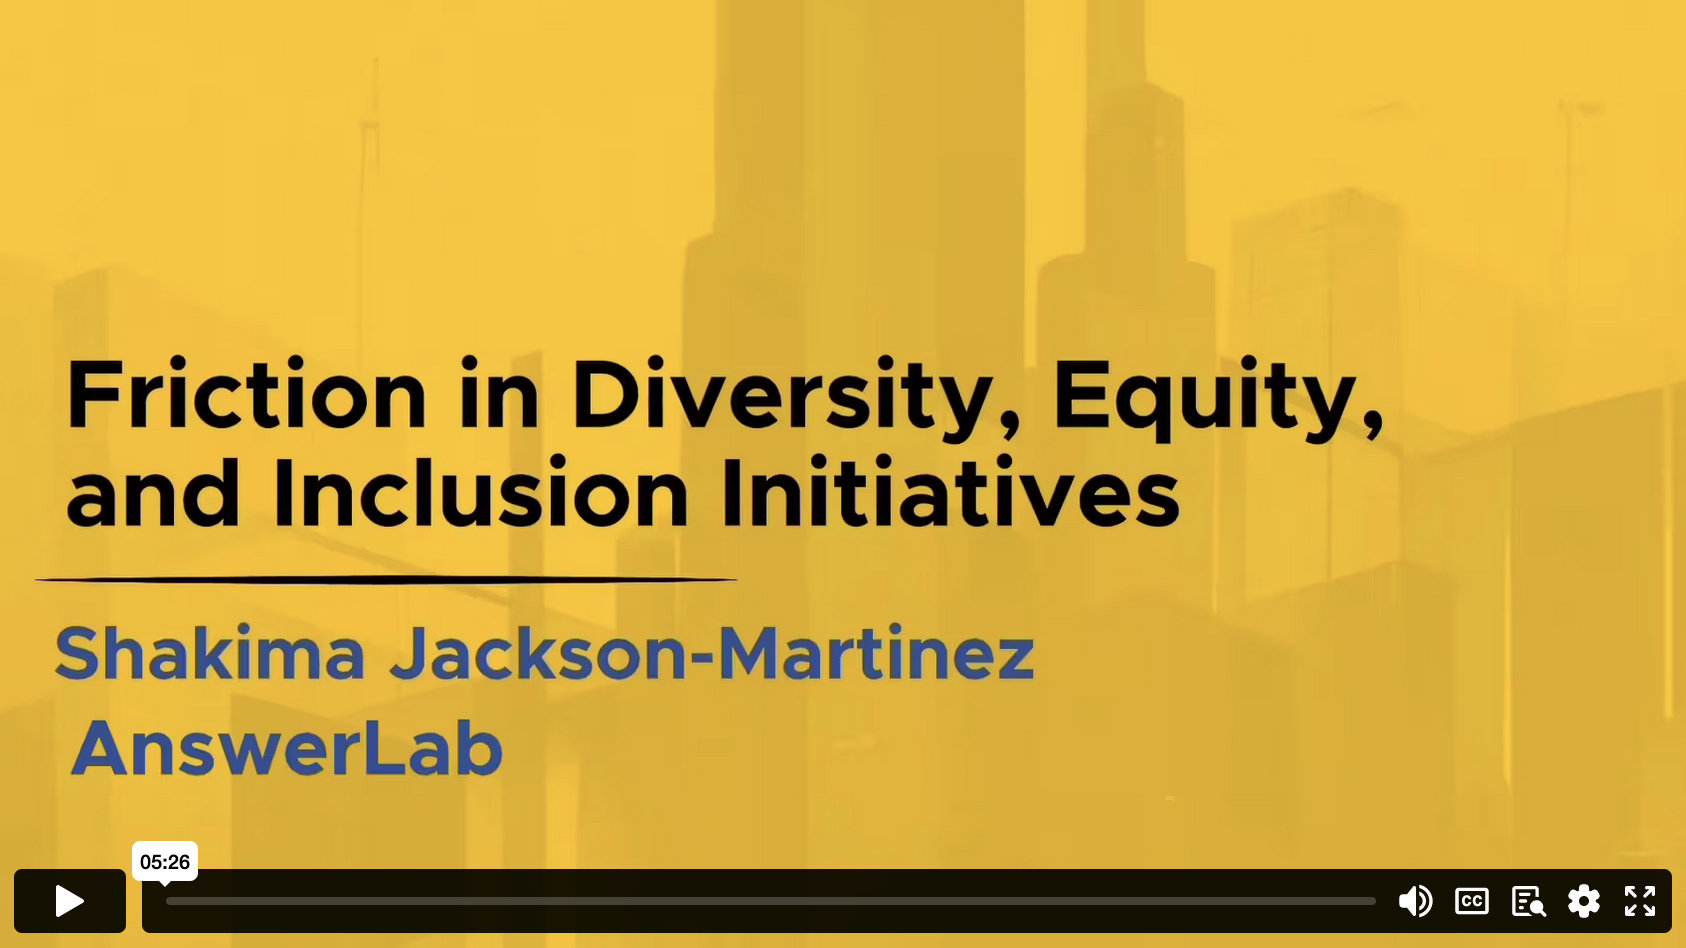 Friction in Diversity, Equity and Inclusion Initiatives. Shakima Jackson-Martinez